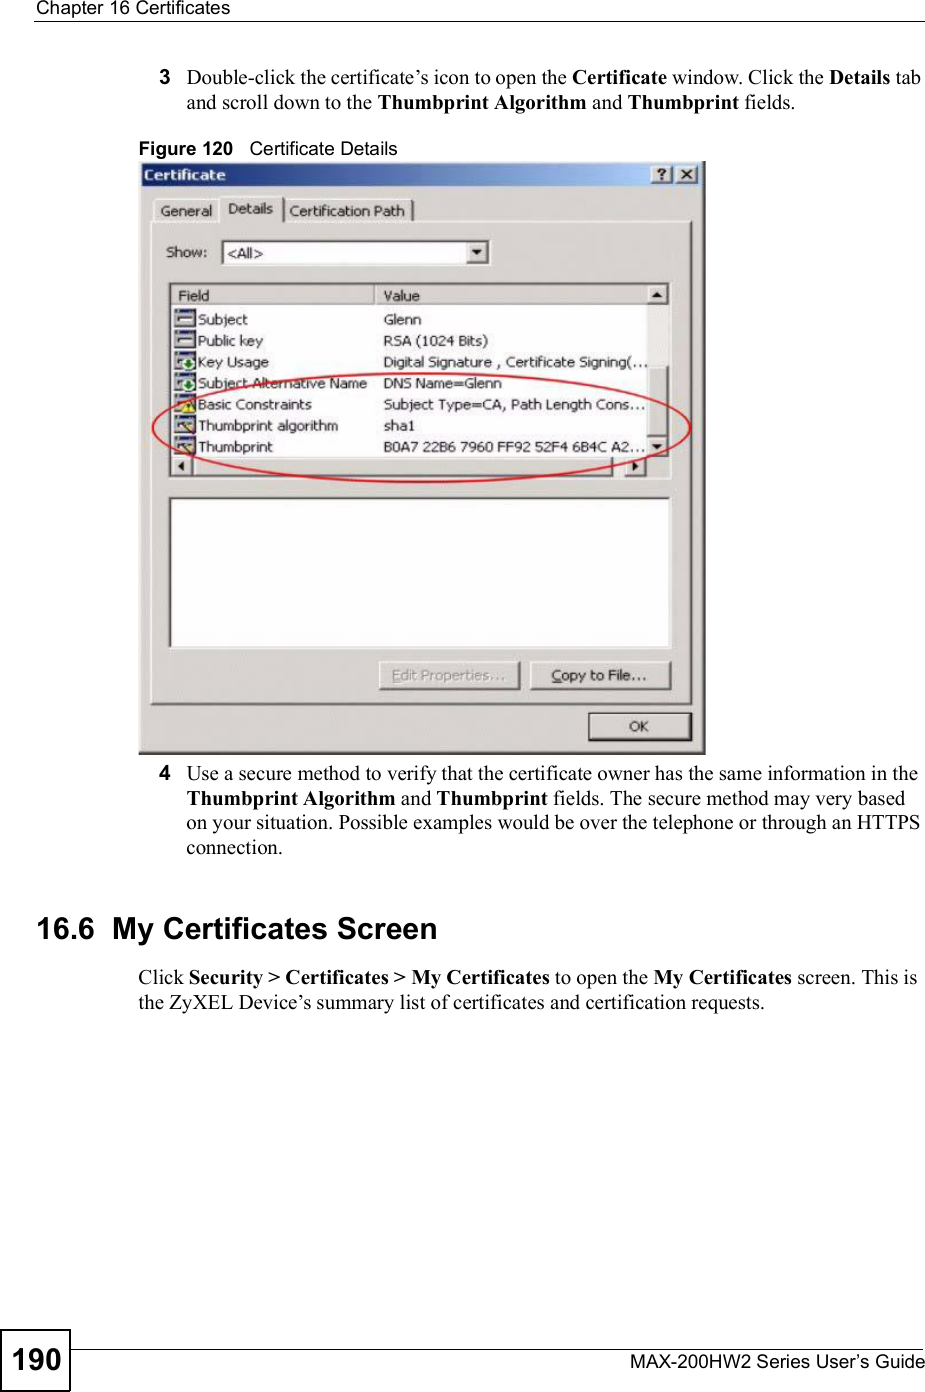 Chapter 16CertificatesMAX-200HW2 Series User s Guide1903Double-click the certificate!s icon to open the Certificate window. Click the Details tab and scroll down to the Thumbprint Algorithm and Thumbprint fields.Figure 120   Certificate Details 4Use a secure method to verify that the certificate owner has the same information in the Thumbprint Algorithm and Thumbprint fields. The secure method may very based on your situation. Possible examples would be over the telephone or through an HTTPS connection.16.6  My Certificates Screen Click Security &gt; Certificates &gt; My Certificates to open the My Certificates screen. This is the ZyXEL Device!s summary list of certificates and certification requests.